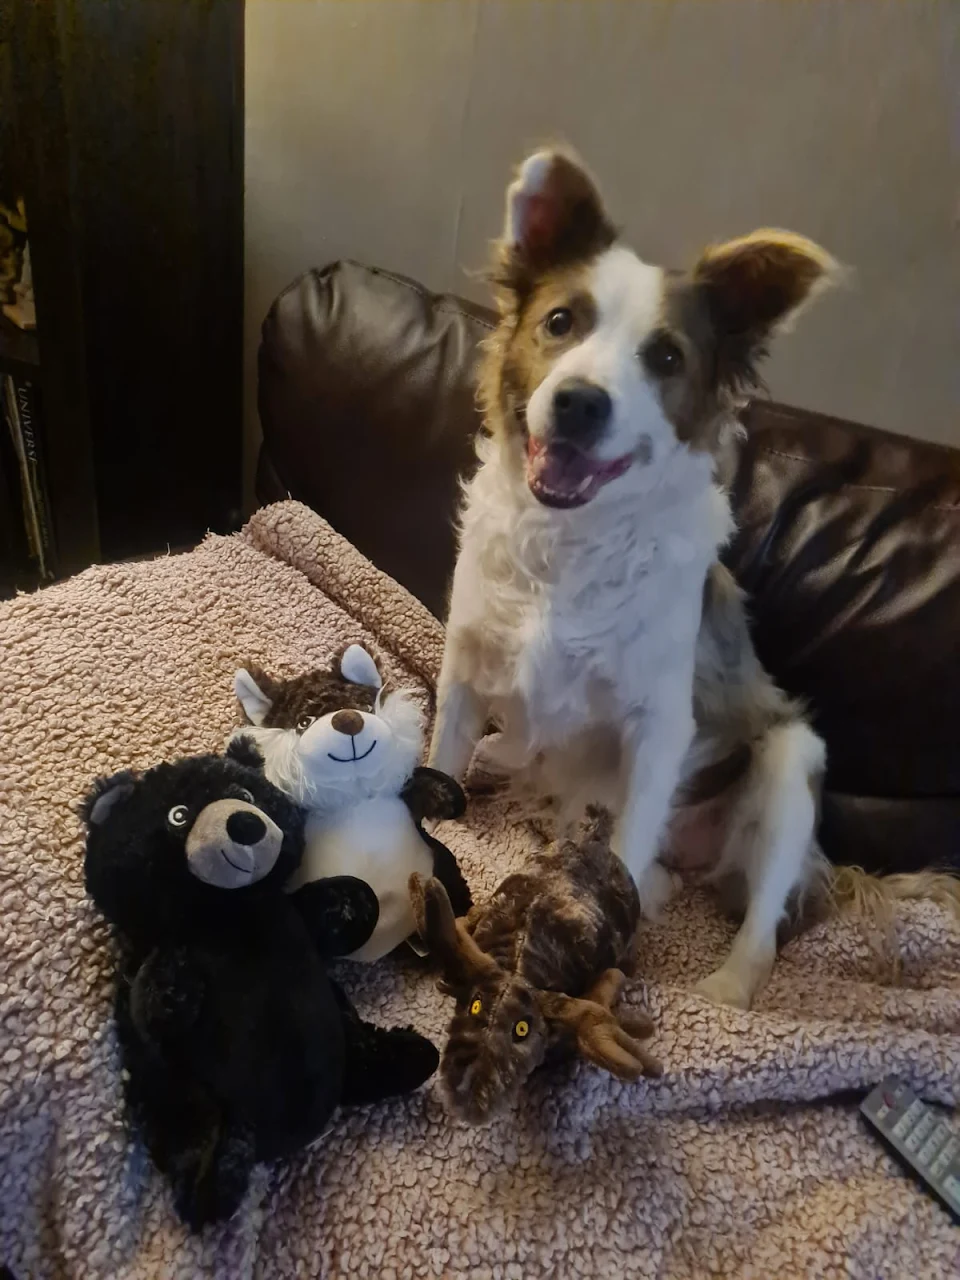 My old girl literally smiling for her new toys